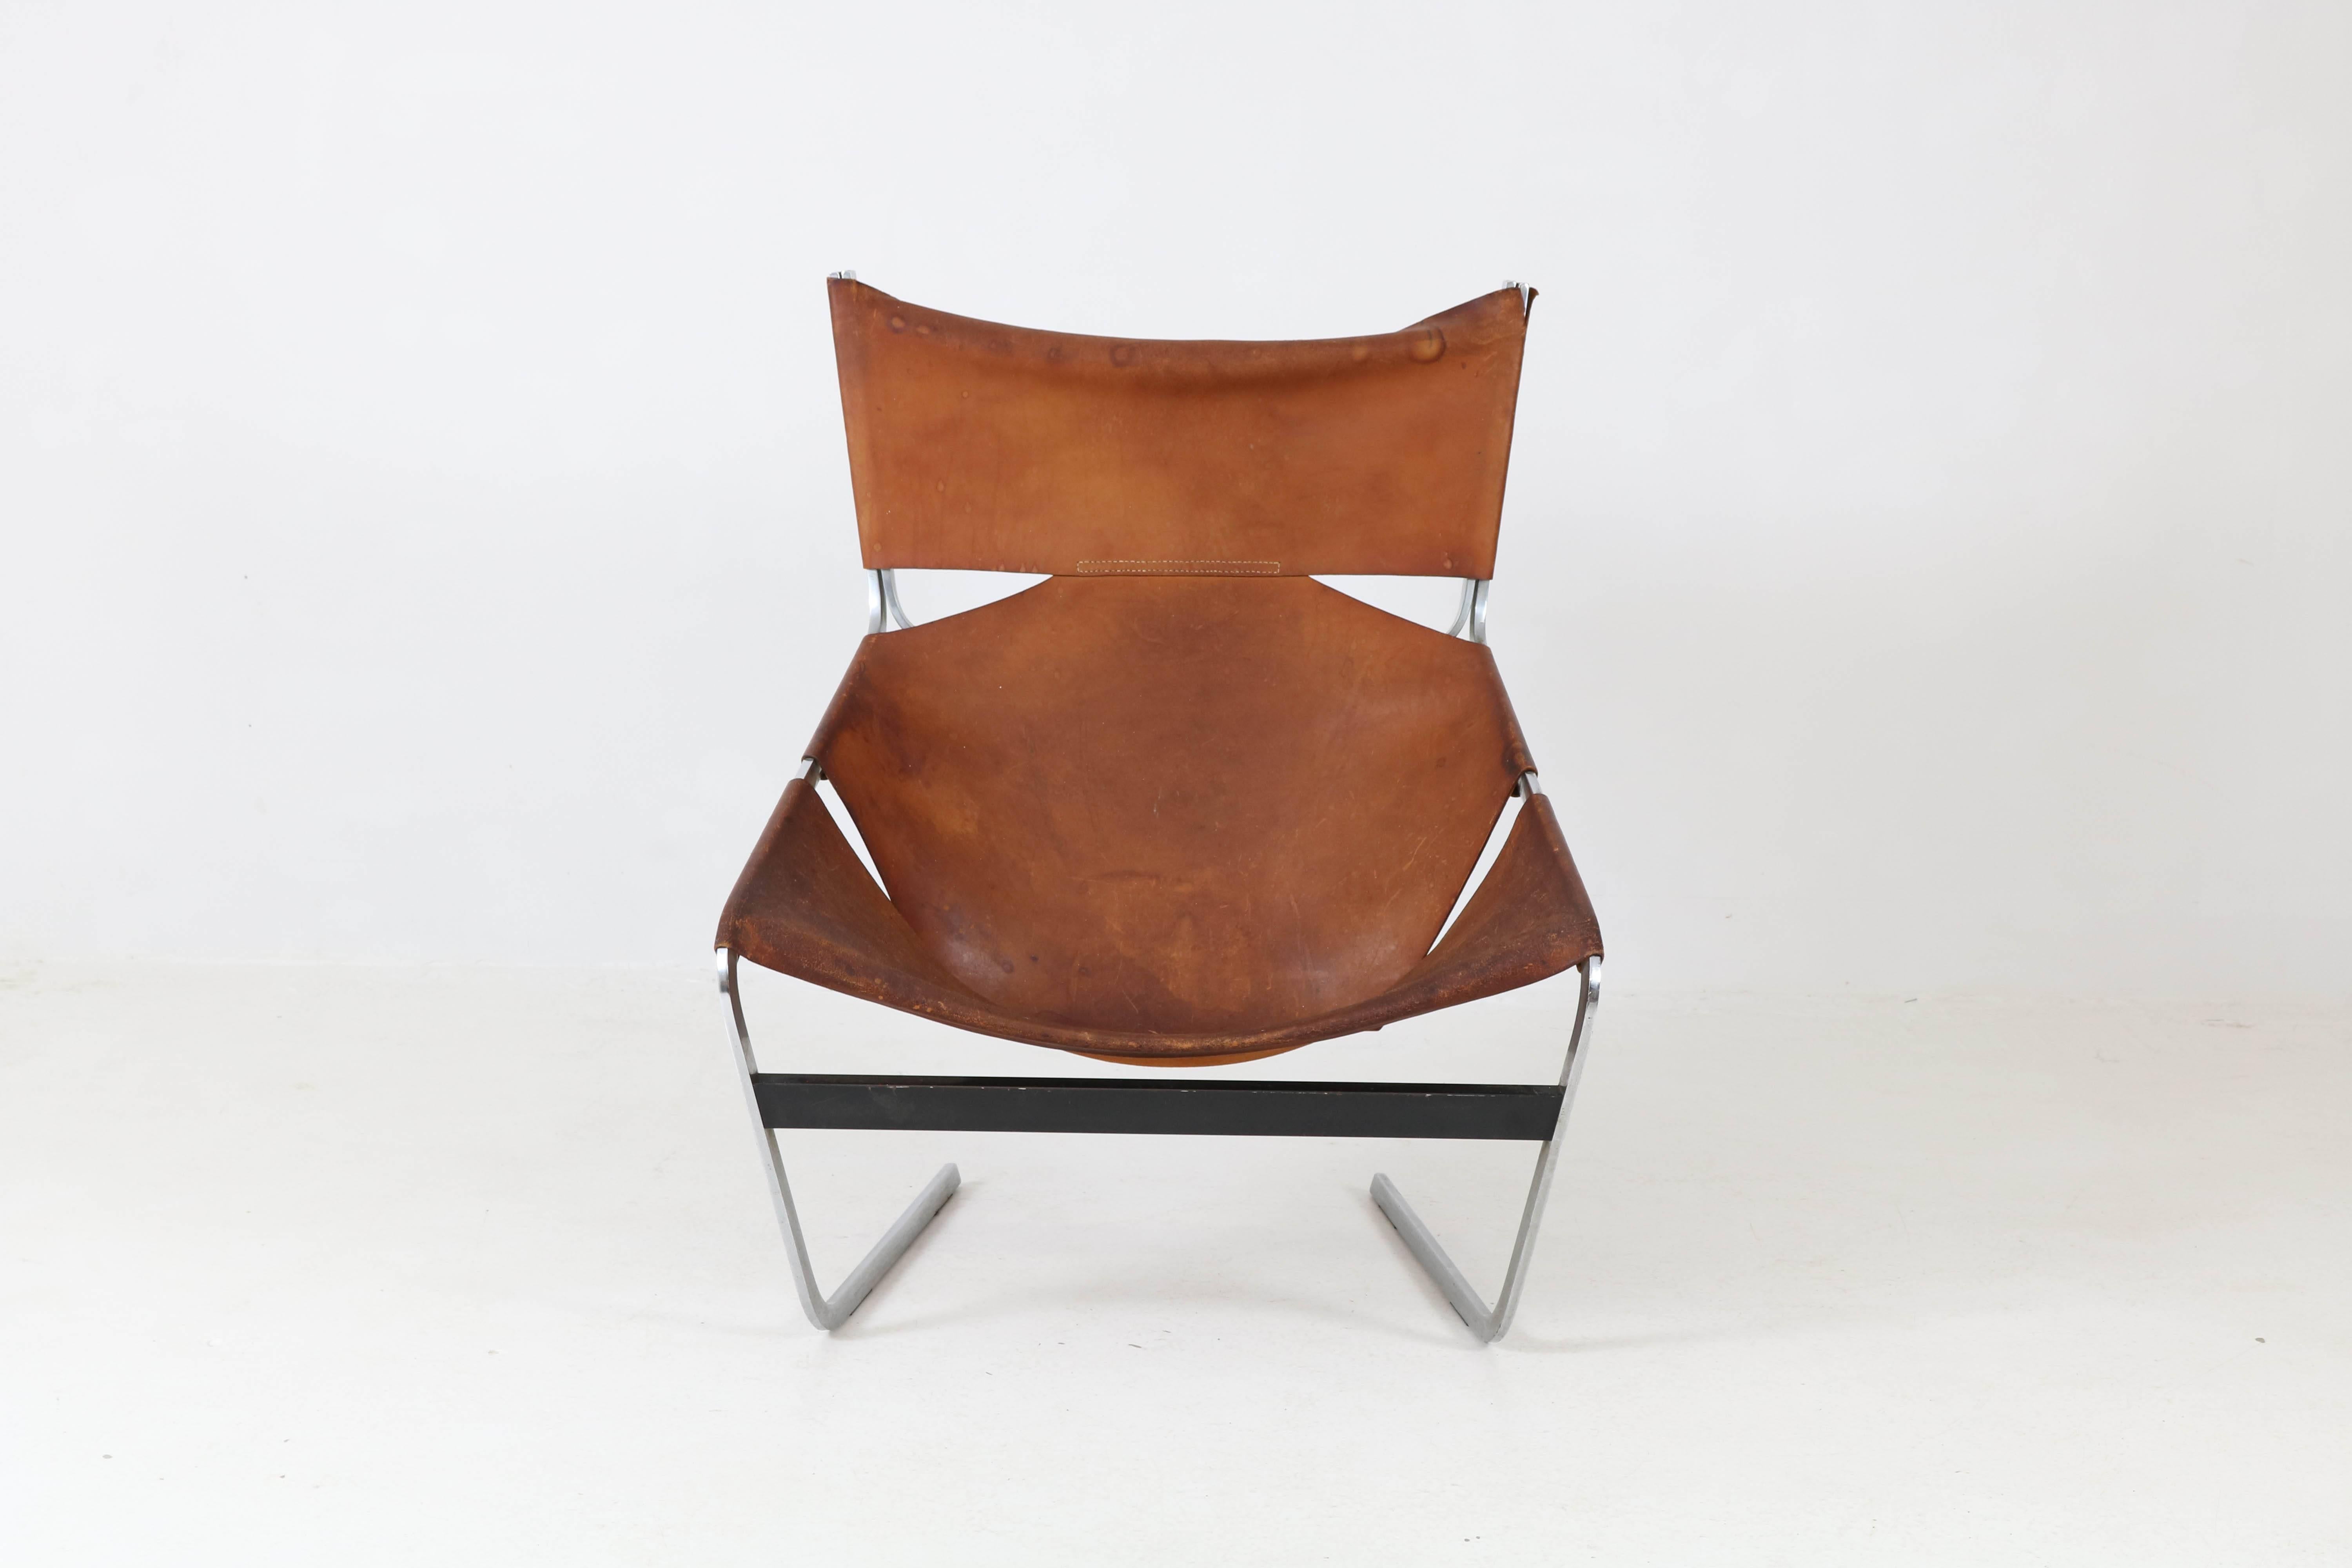 Mid-Century Modern F-444 lounge chair by Pierre Paulin for Artifort, 1960s.
Original leather upholstery with great patina.
Iconic design with comfortable seating.
Marked with Artifort label.
In fair condition with minor wear consistent with age